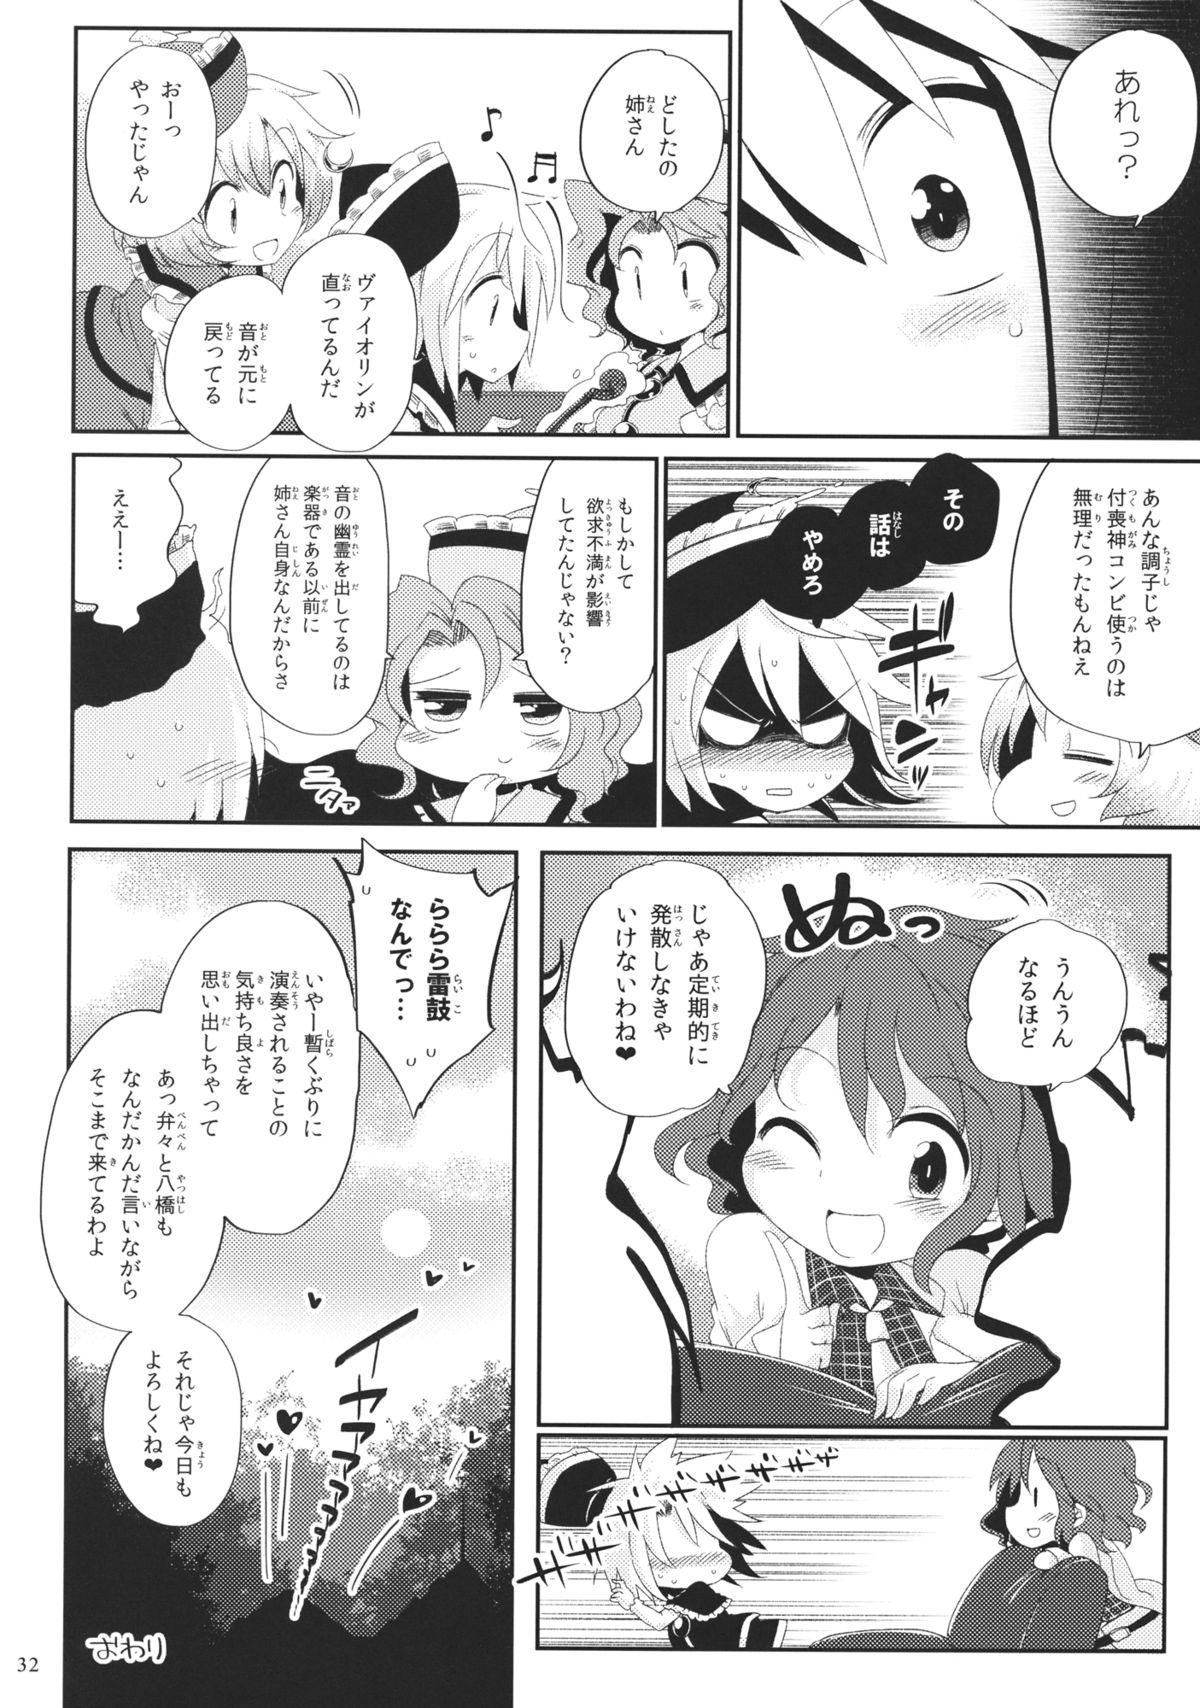 Sesso Alternate Modulation - Touhou project Polla - Page 31